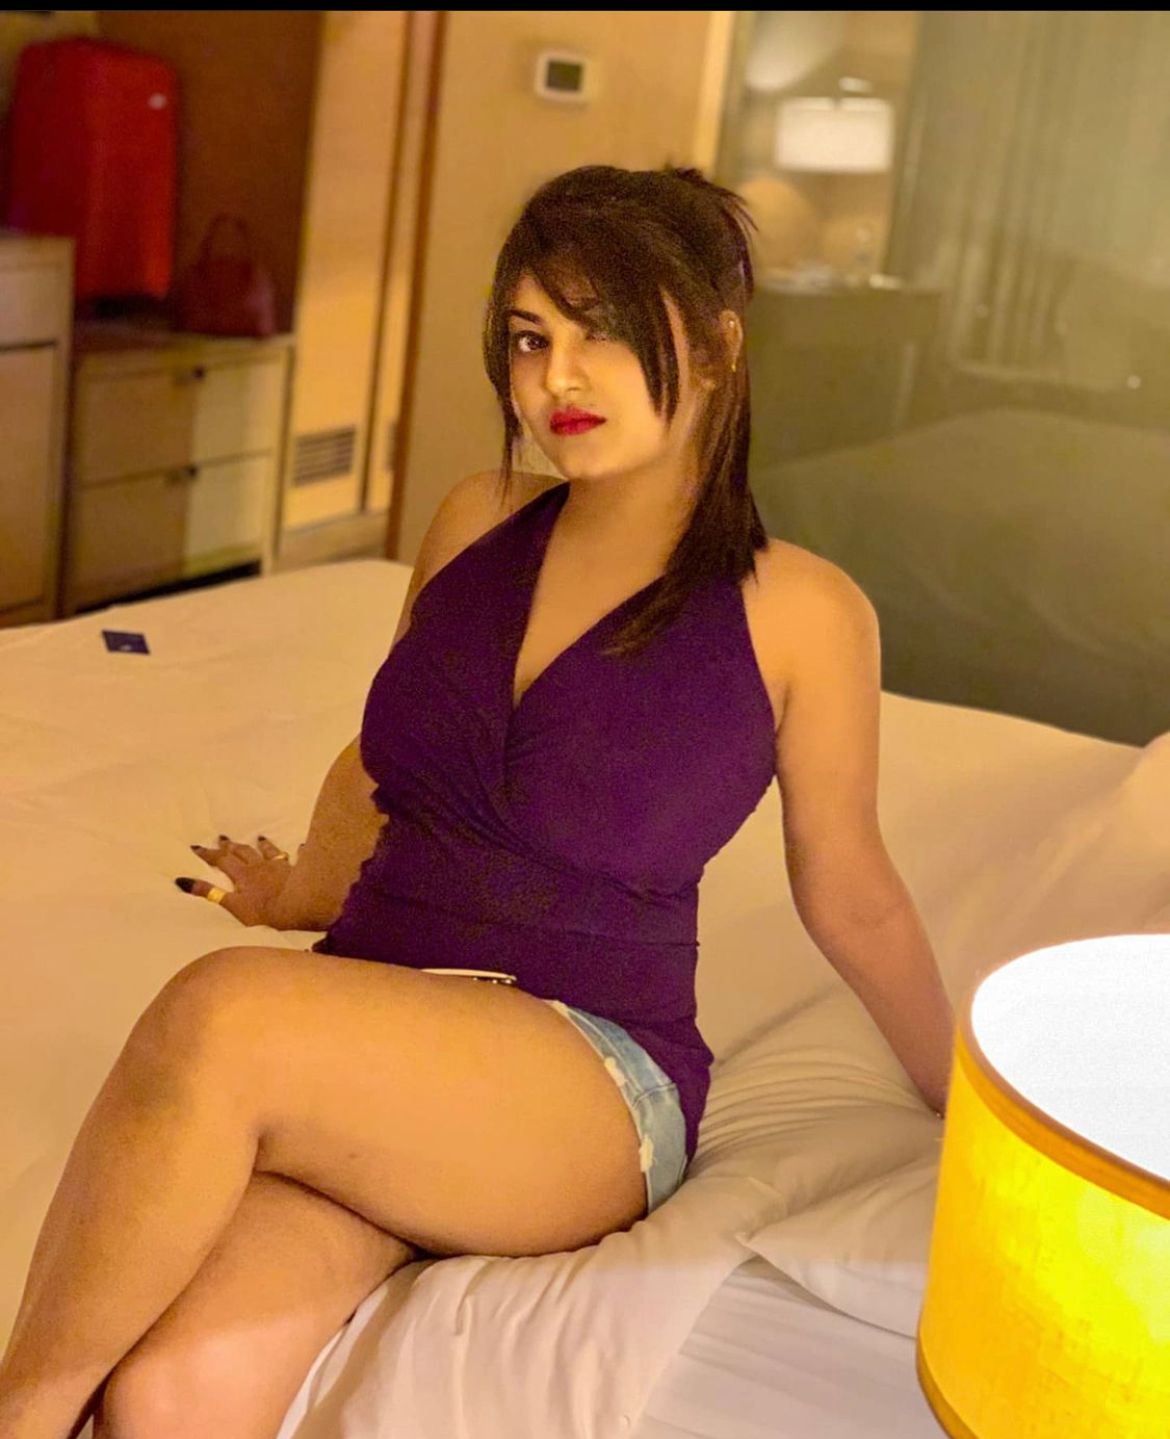 LOW-RATES🤙 CALL GIRLS IN DELHI-IN CALL & OUT CALL FACILITES ] AVAILABILITY: HOTELS & FLAT 24/7